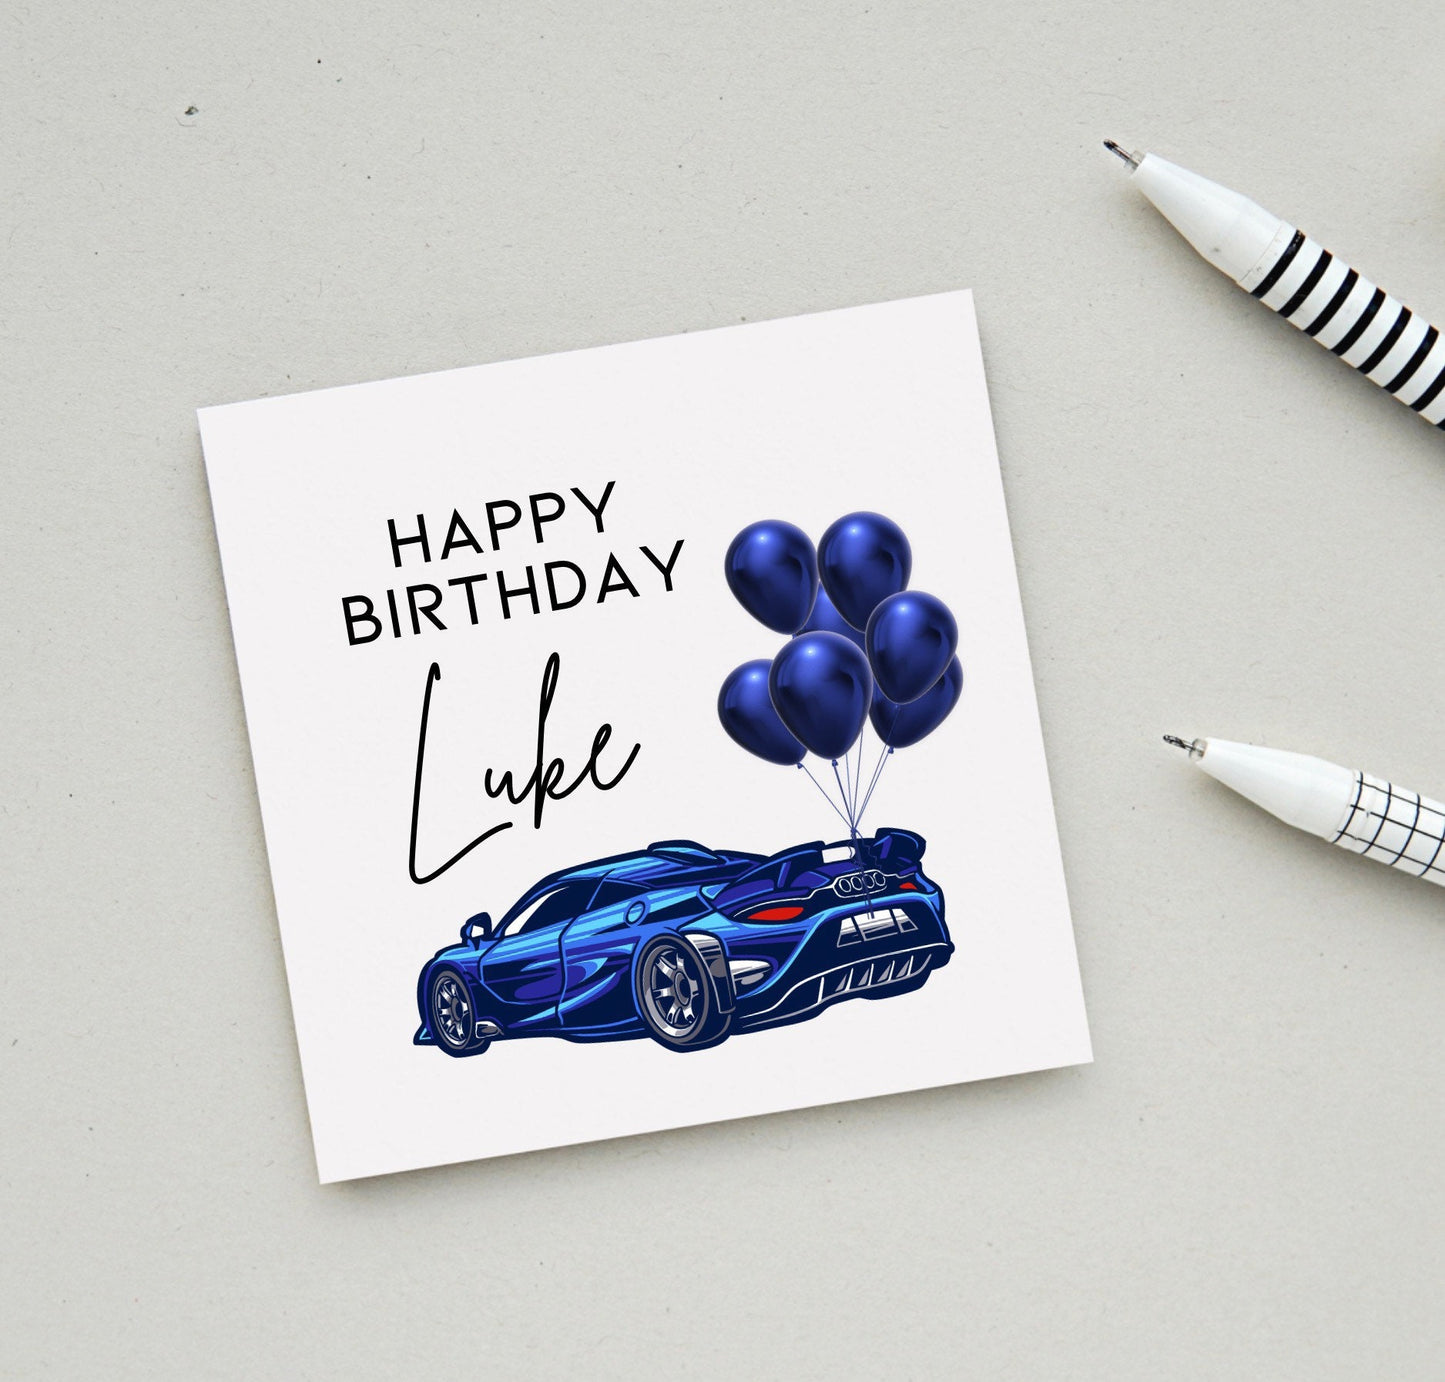 Personalised sports car birthday Card for men, blue race car and balloons card for husband, boyfriend, brother, uncle, dad,friends colleague